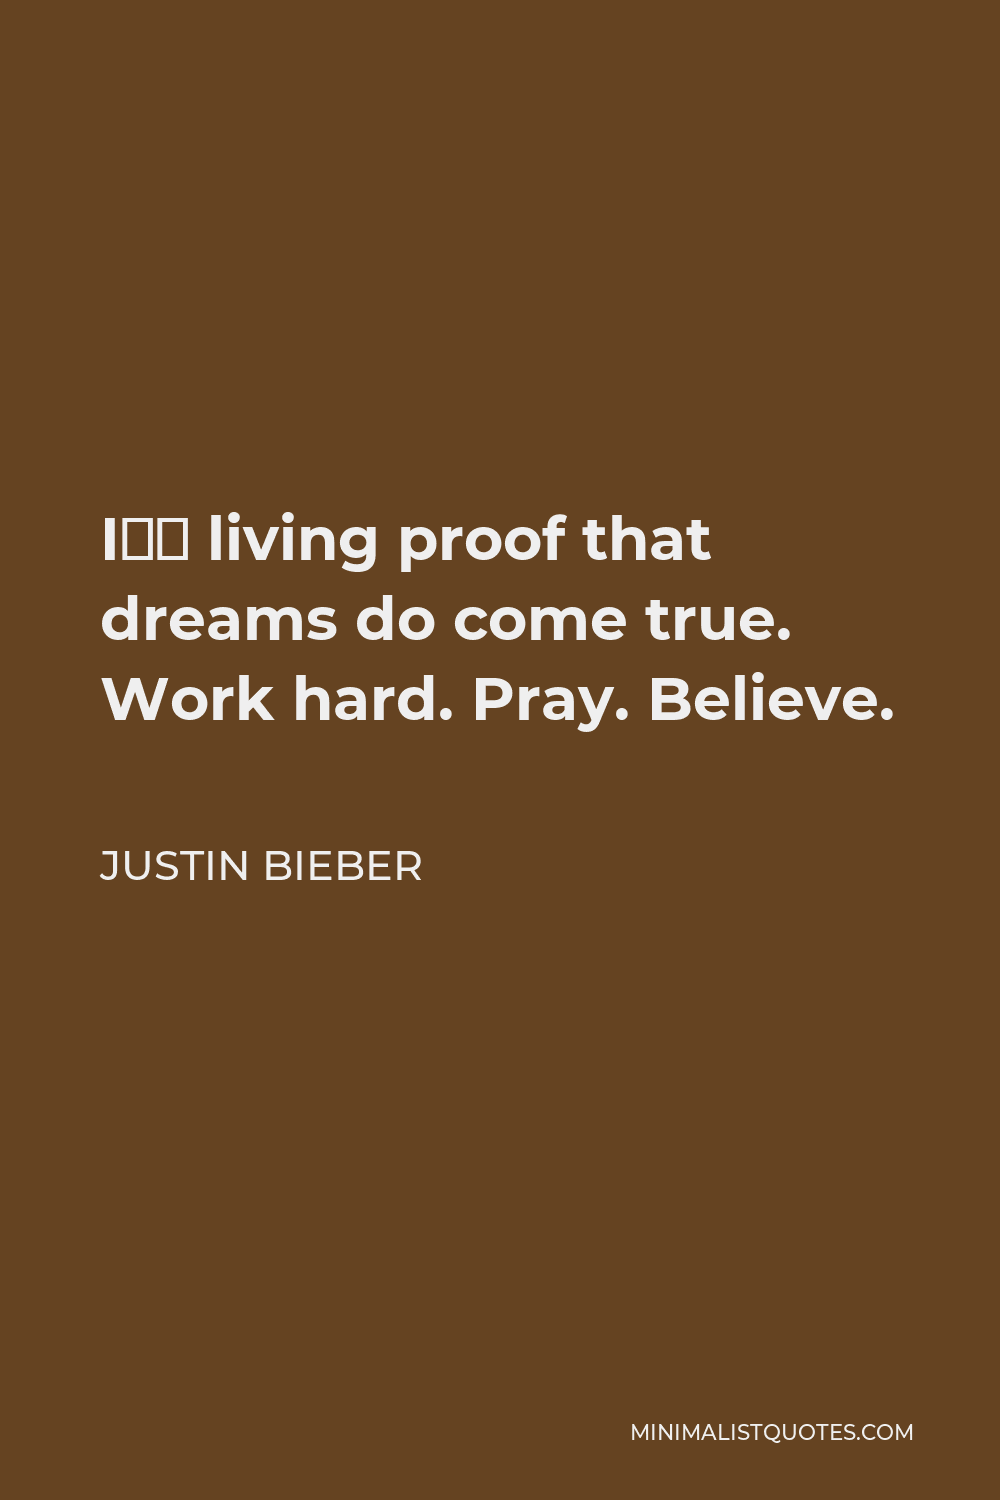 Justin Bieber Quote - I’m living proof that dreams do come true. Work hard. Pray. Believe.